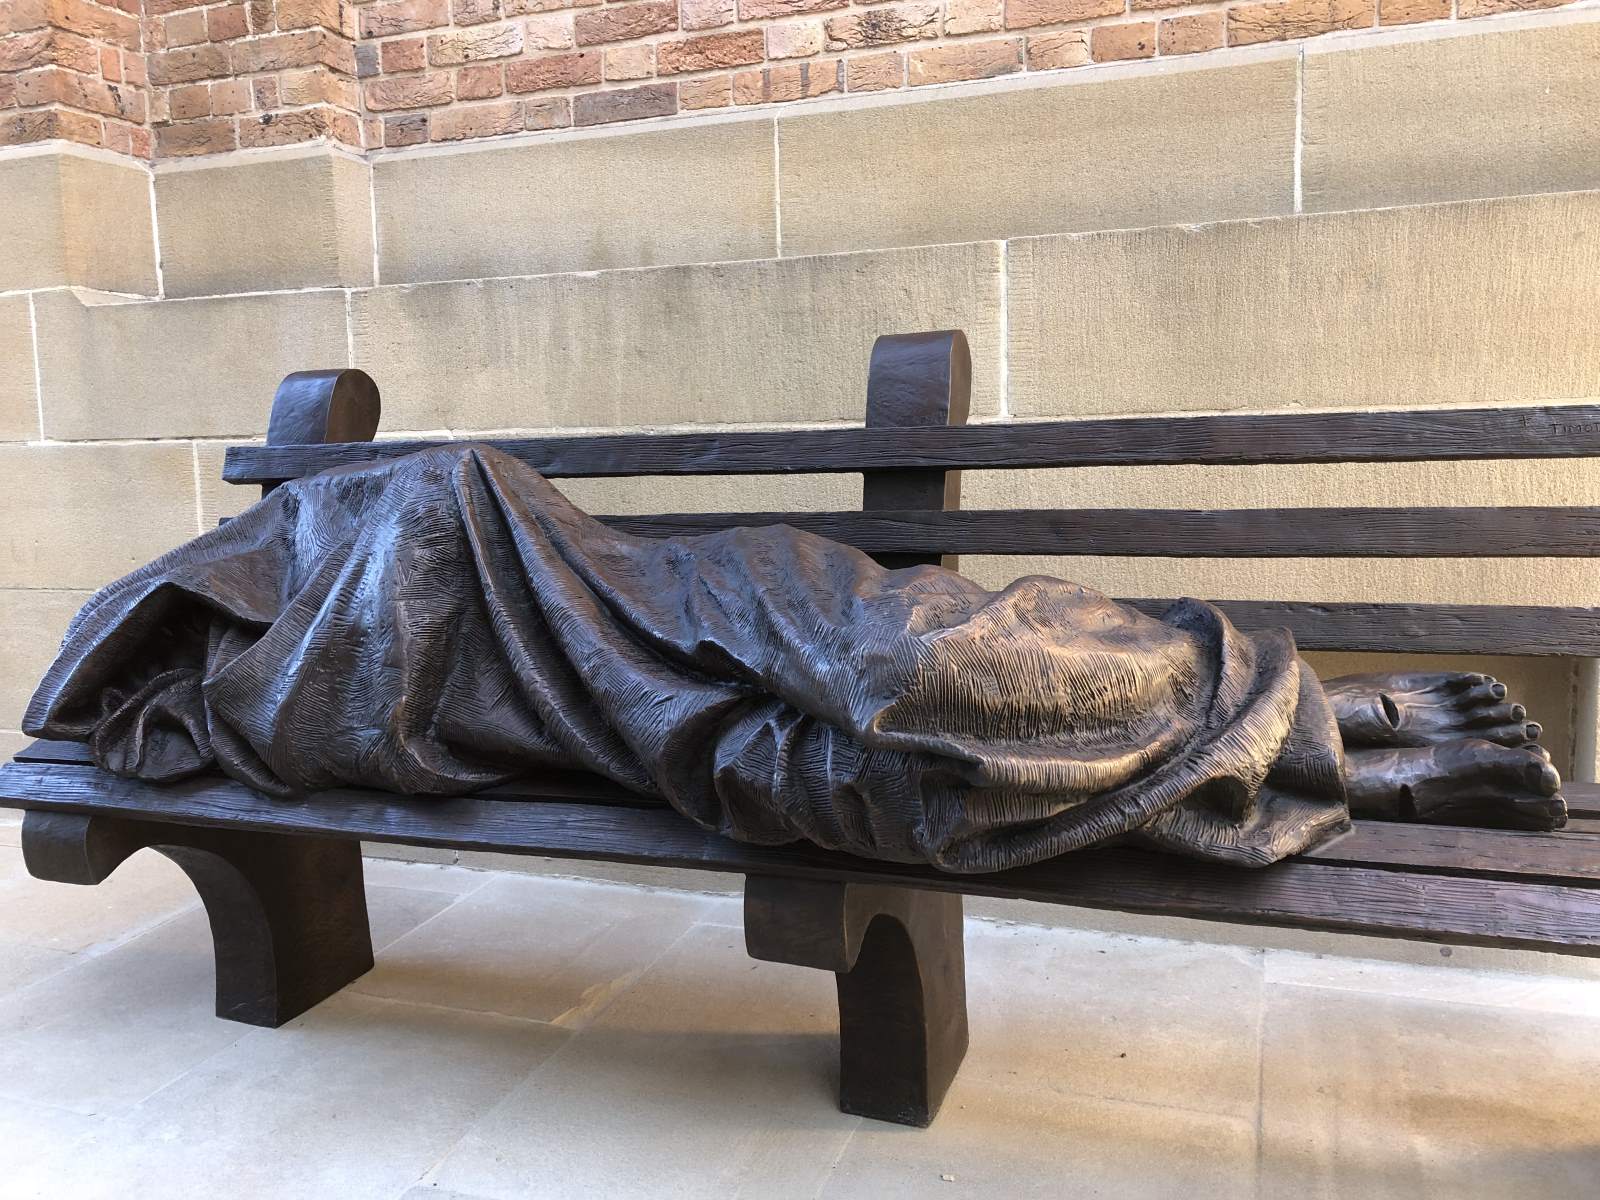 11-astounding-facts-about-the-homeless-jesus